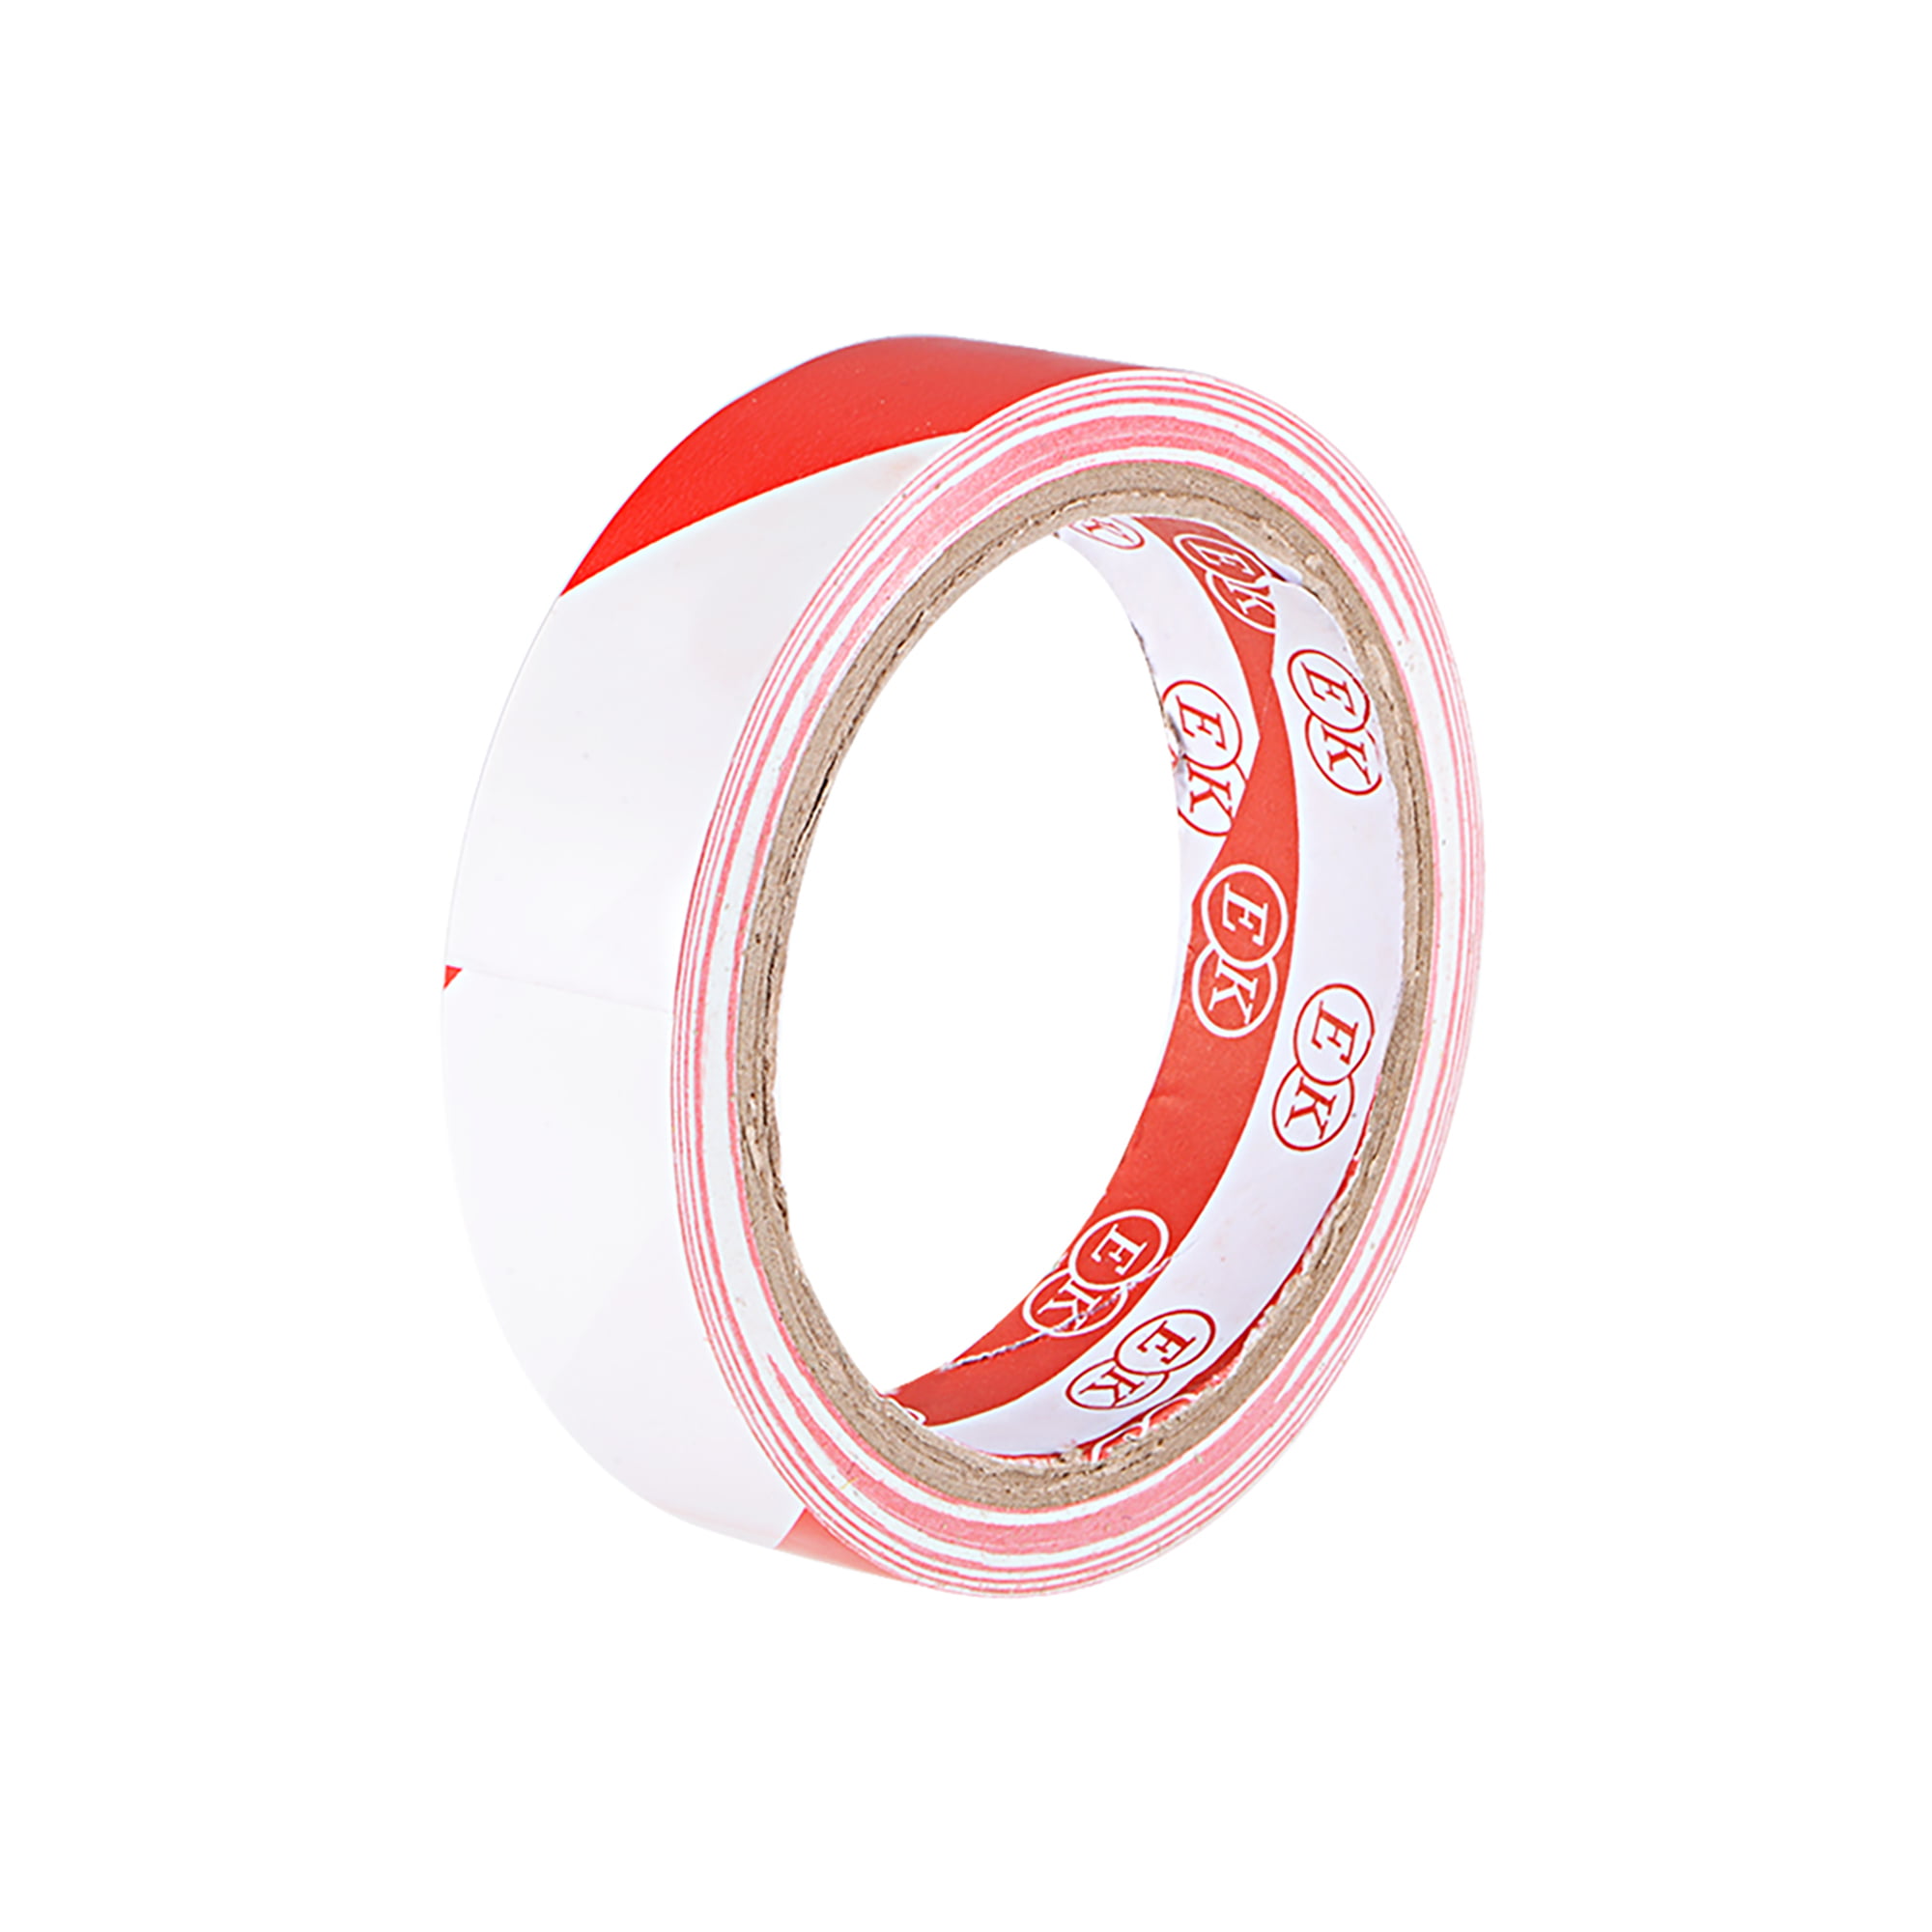 Industrial Marking T... Details about   Reflective Tape Waterproof High Visibility Red & Yellow